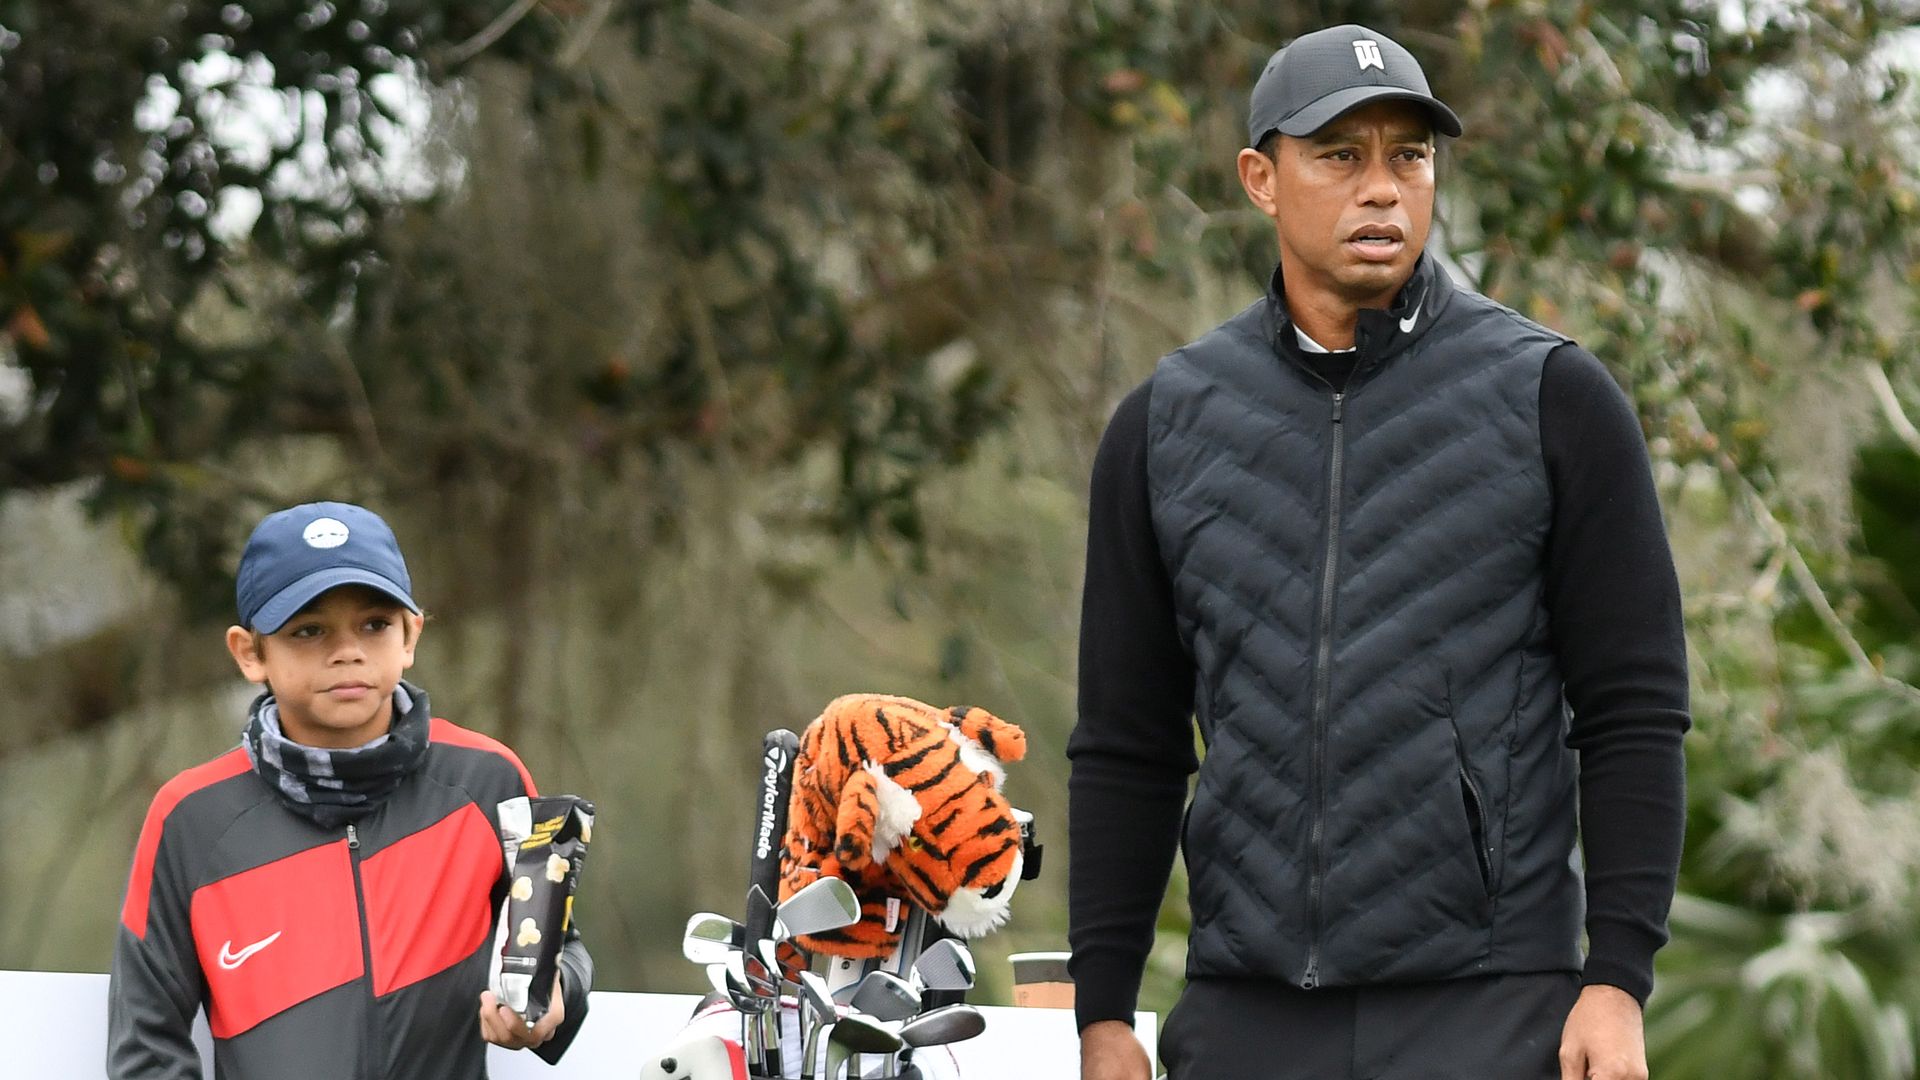 Tiger Woods and his son Charlie competing at the PNC Championship in 2020.